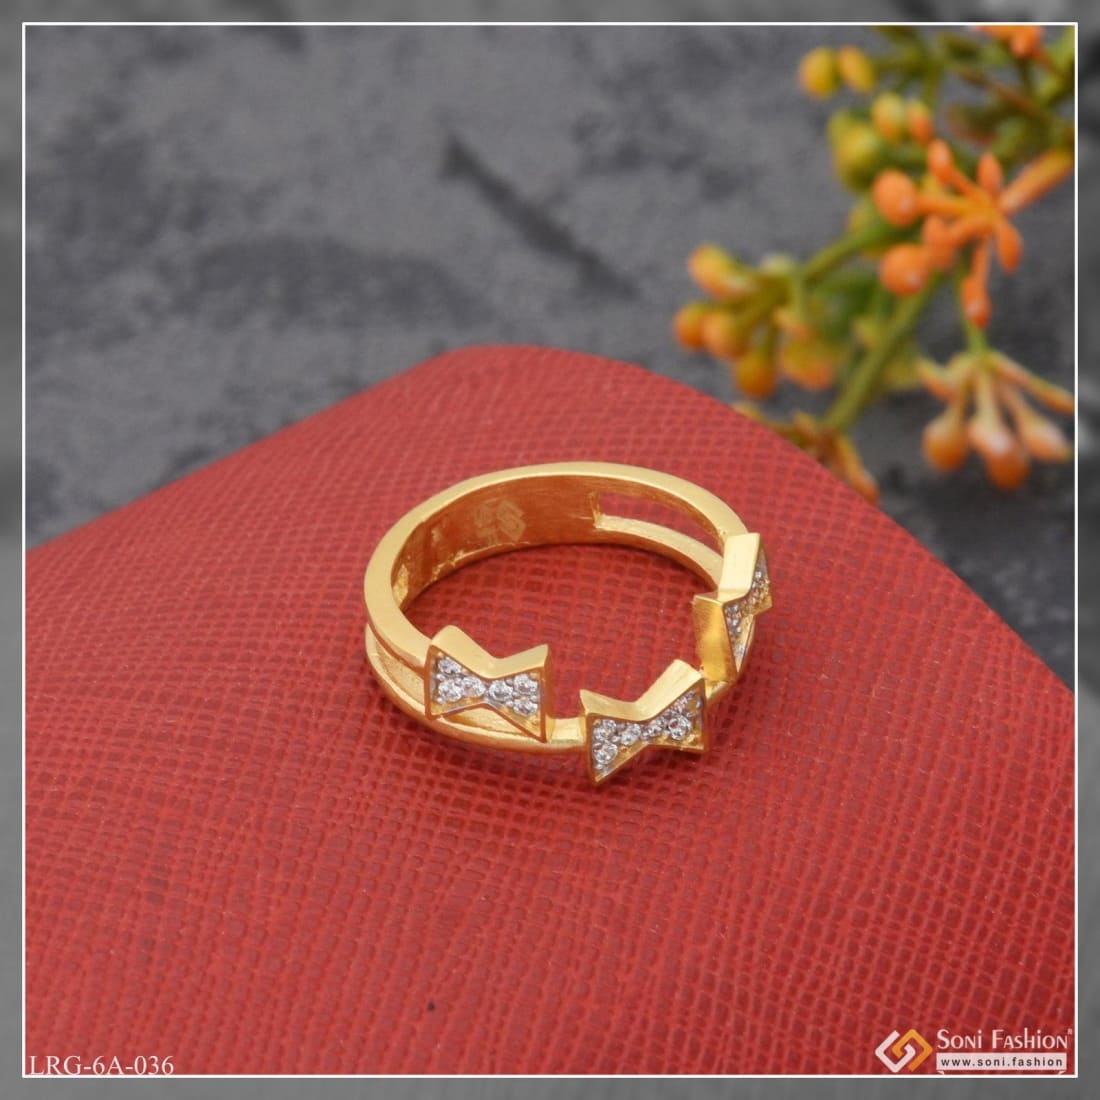 Exquisite 18 Karat Yellow Gold And Diamond Floral Ring